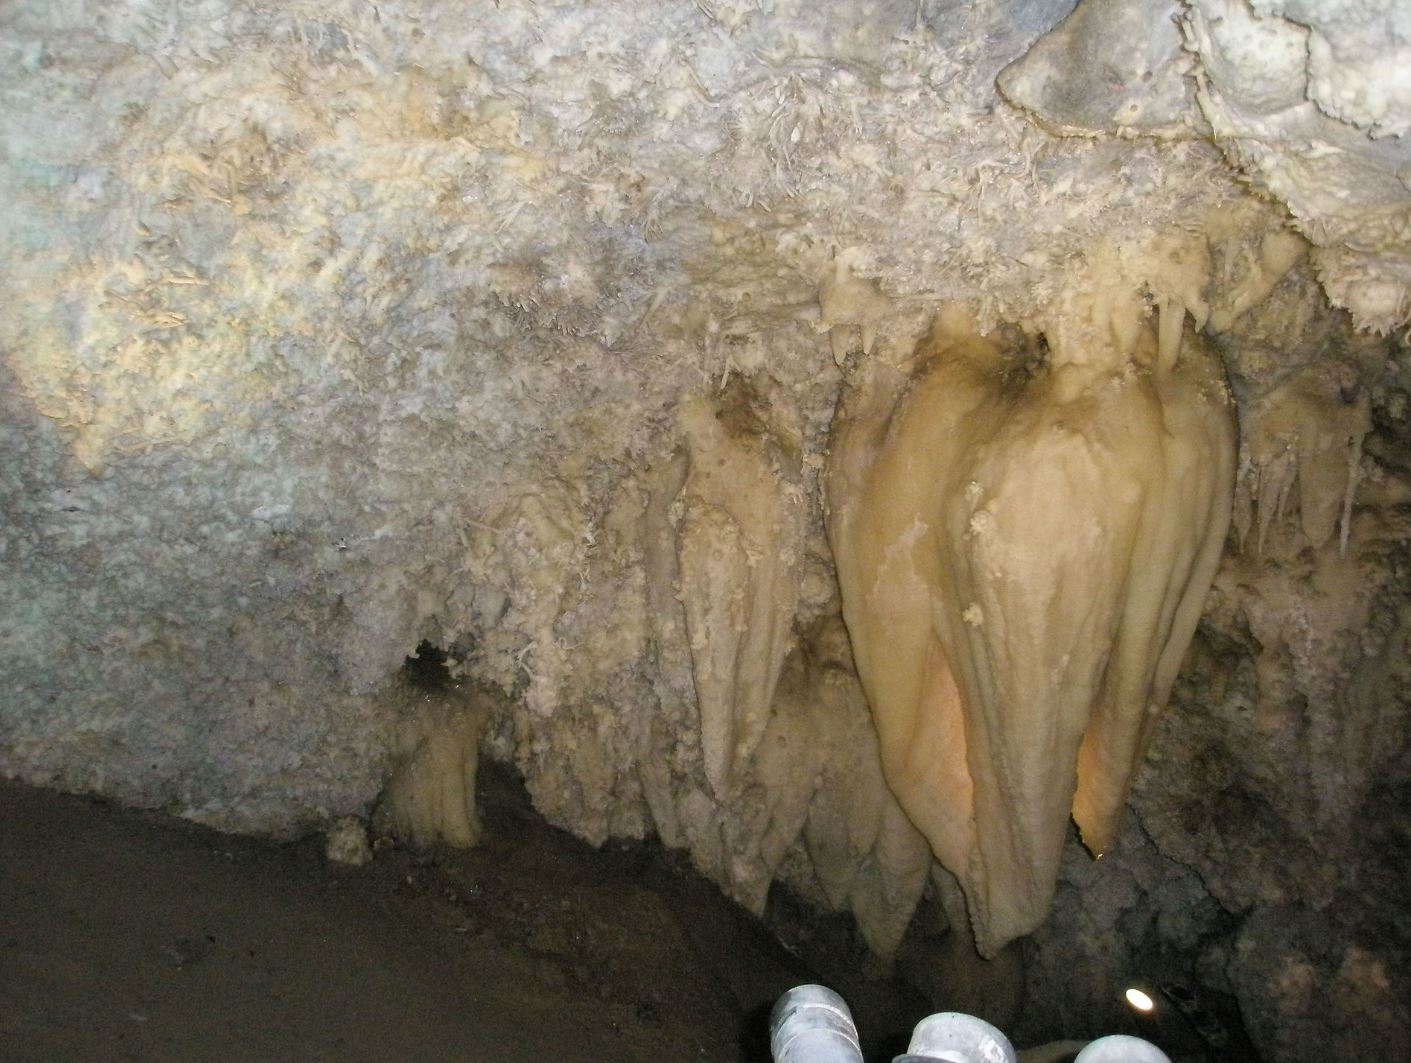 A heart-shaped formation in Timpanogos Cave